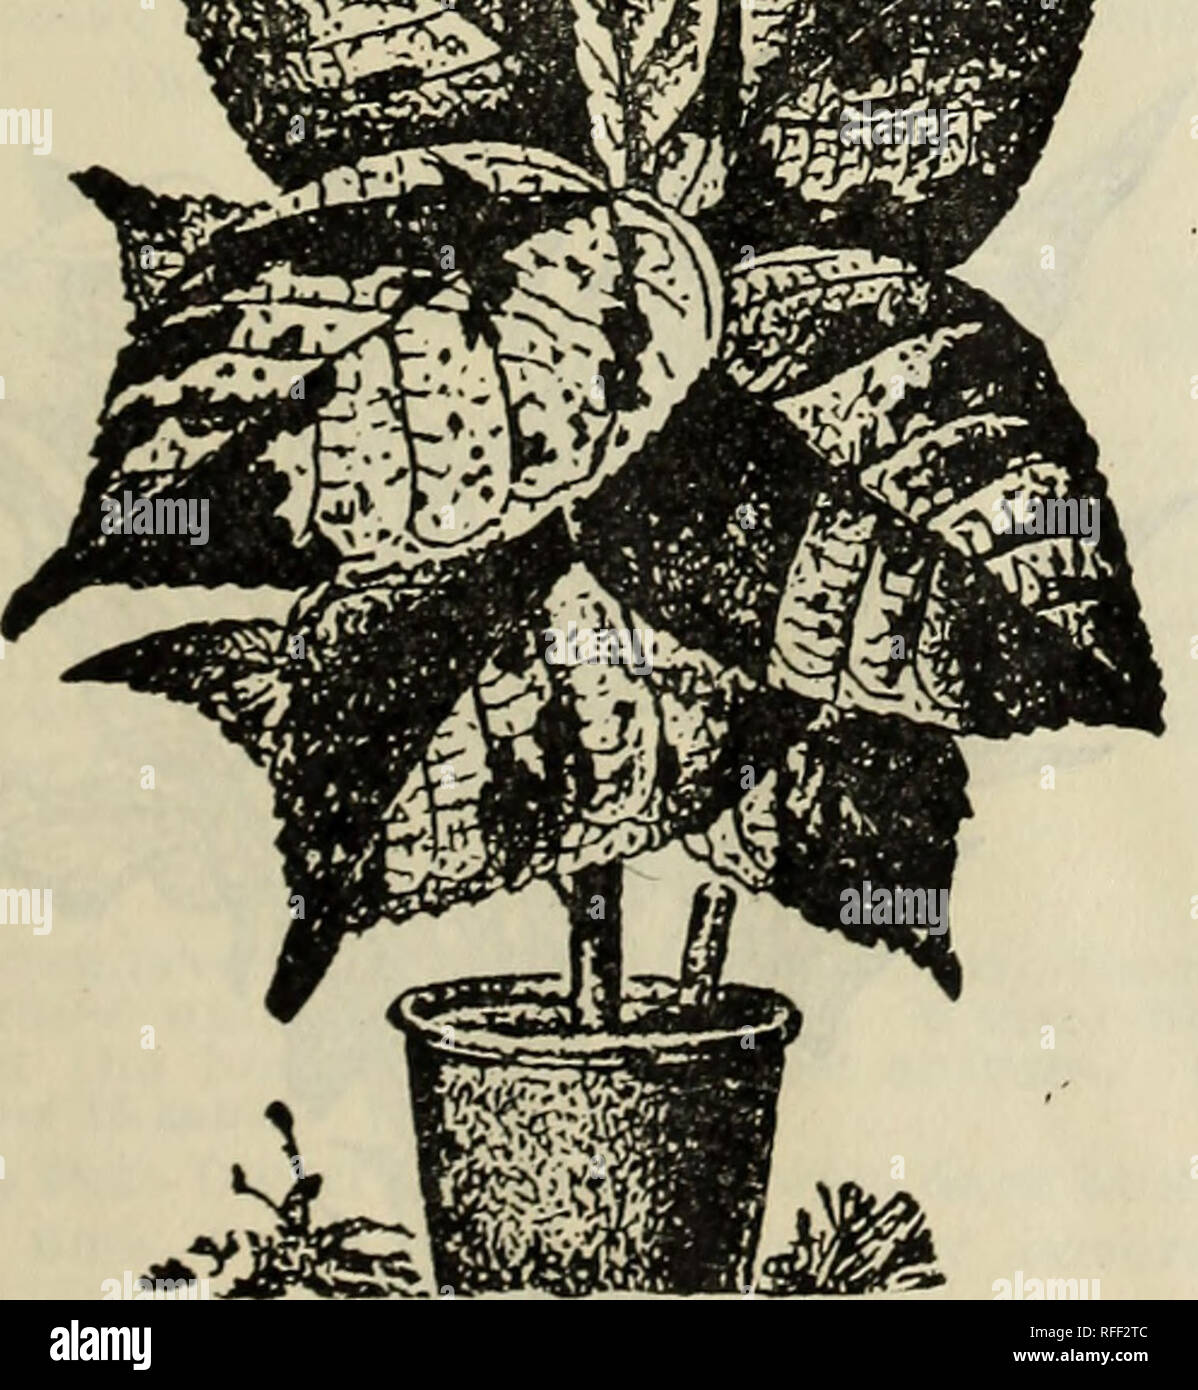 . [Catalogue. Nursery stock Ohio Columbus Catalogs; Flowers Catalogs; Ornamental shrubs Catalogs; Plants, Ornamental Catalogs. Double Kriiiged l»etuiiia. Acalypha Macafeana. One of the most striking plants for the garden. It has broad, oblong leaves from 6 to 8 Inches long, which are Irregularly variegated, striped and blotched with bright blood-red and pink on a deep-red ground; sometimes the entire one half of the leaf Is brilllant-red, without any trace of green about it, while some leaves will show only slight stripes and blotches, no two leaves ever being alike. Stands the hot sun perfect Stock Photo